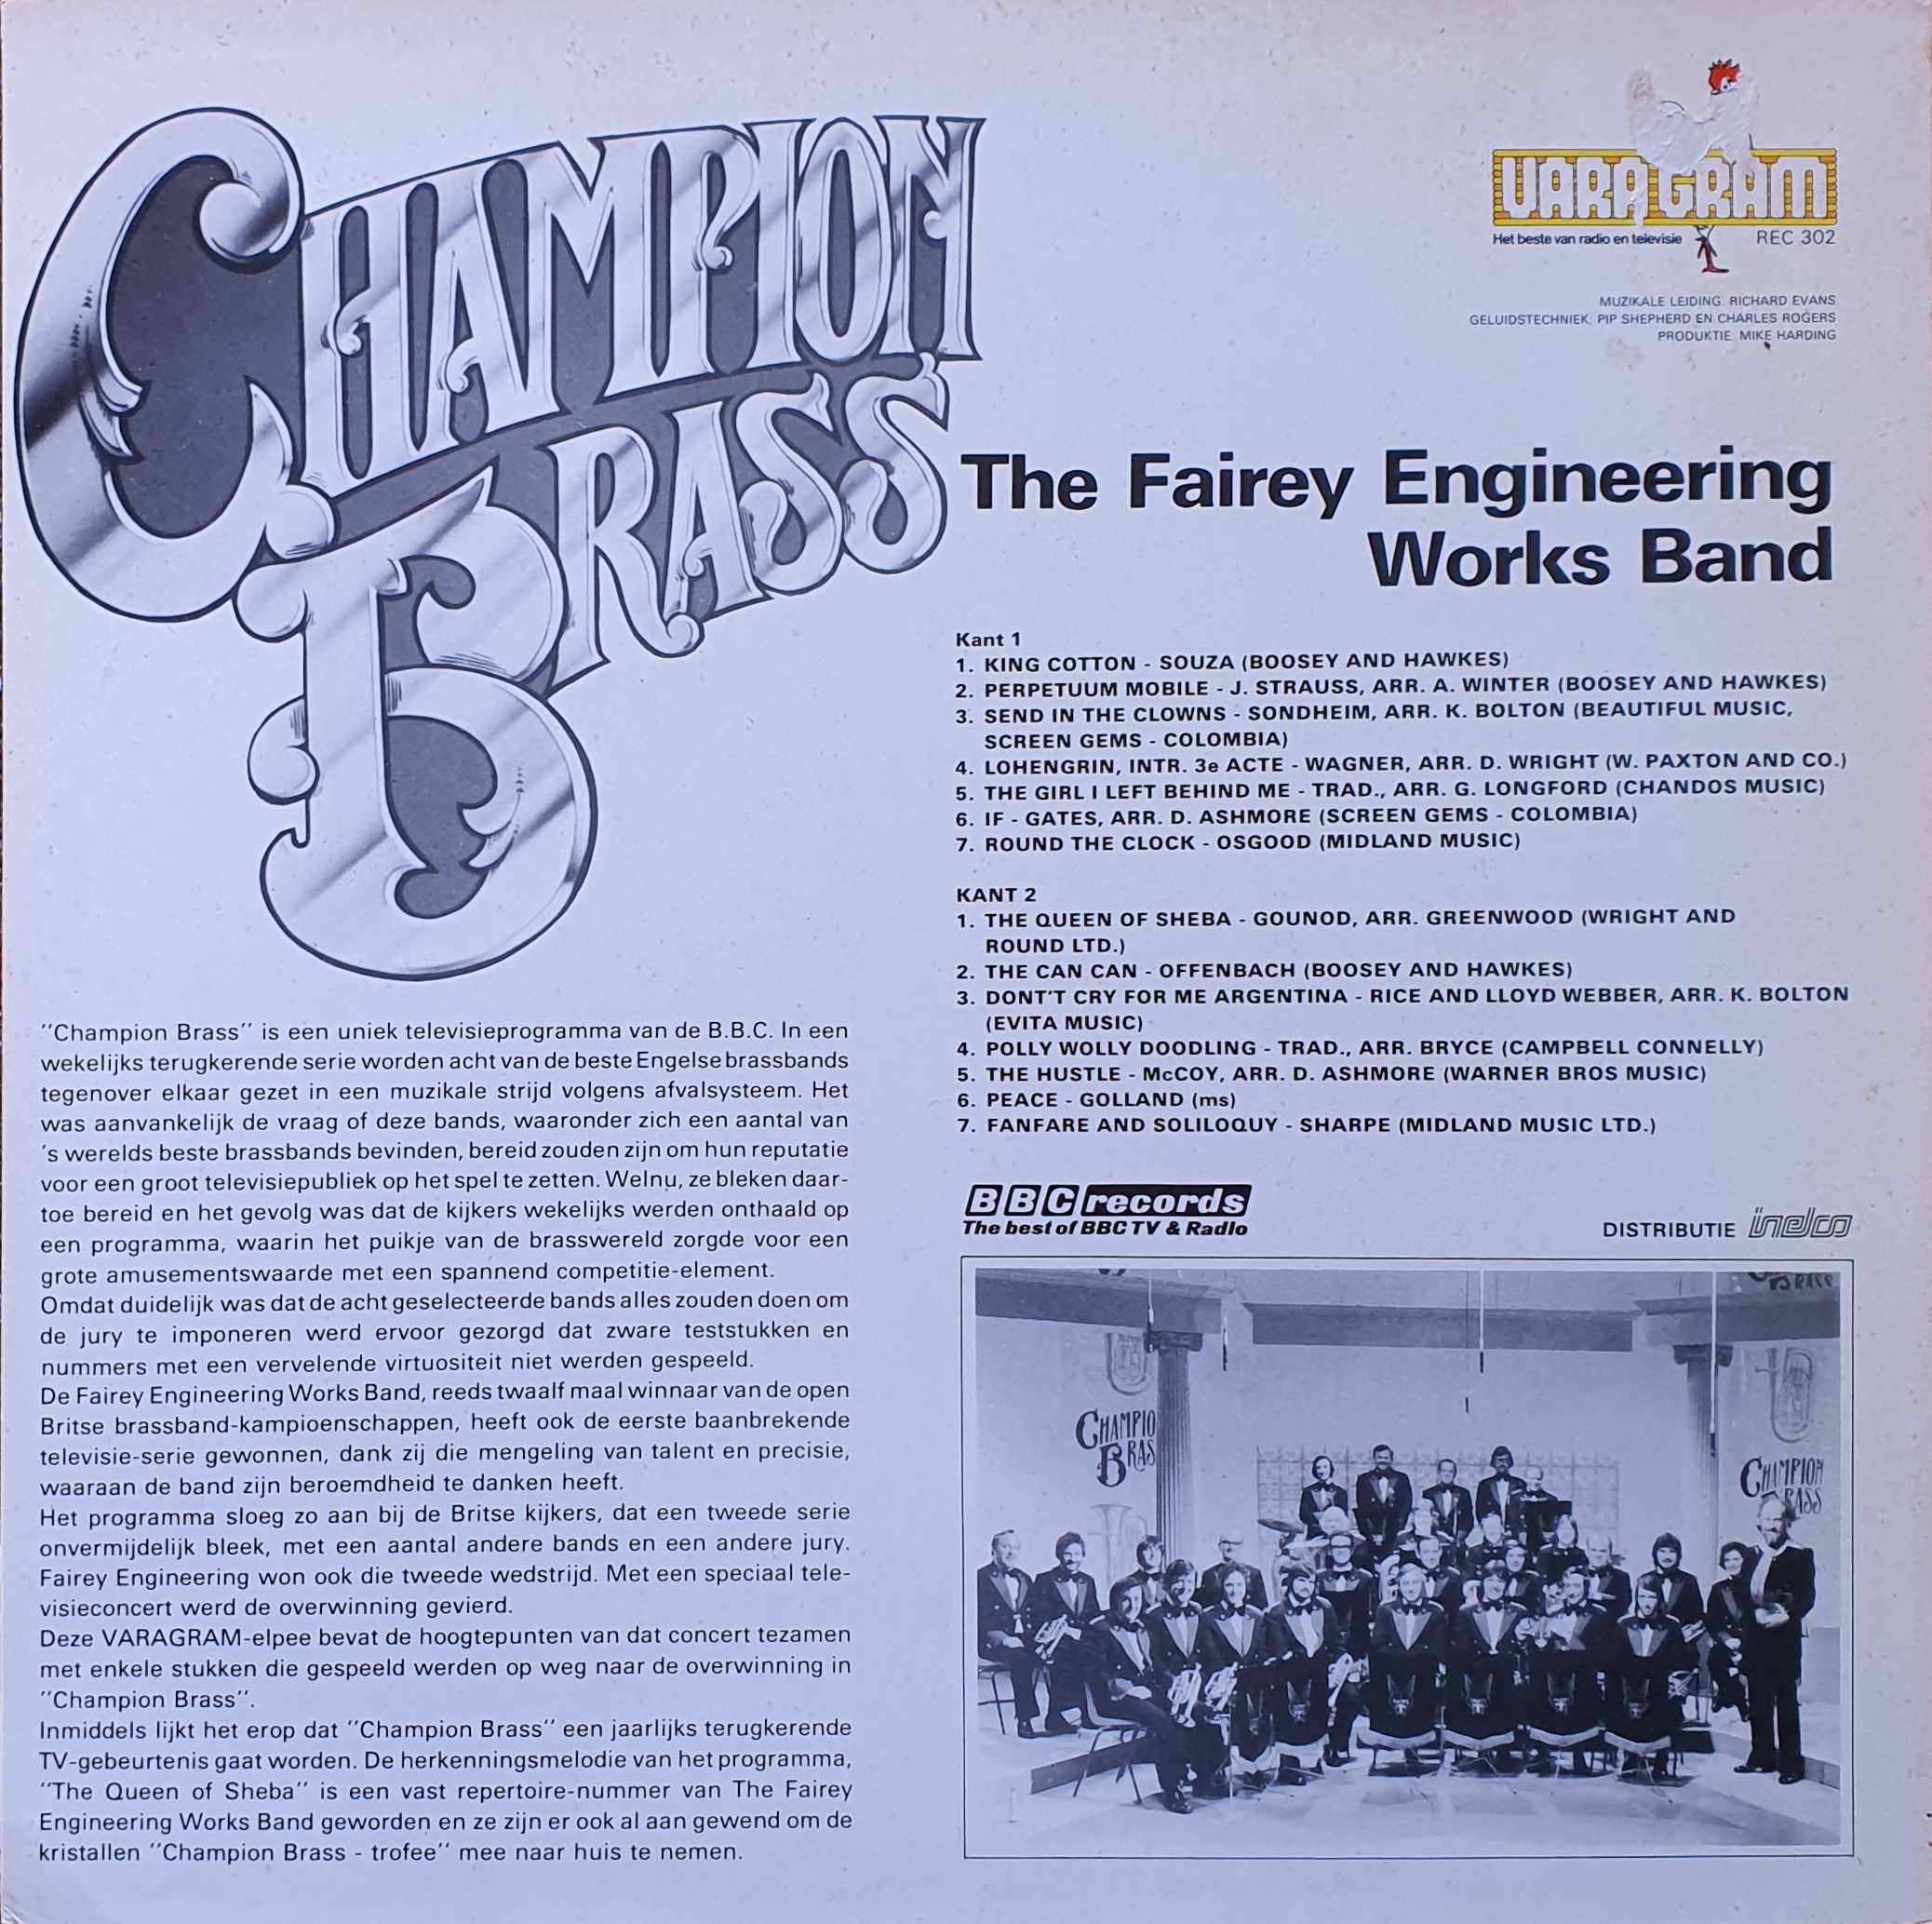 Picture of REC 302-iD The Fairey Engineering Works band - Champion brass by artist Various from the BBC records and Tapes library